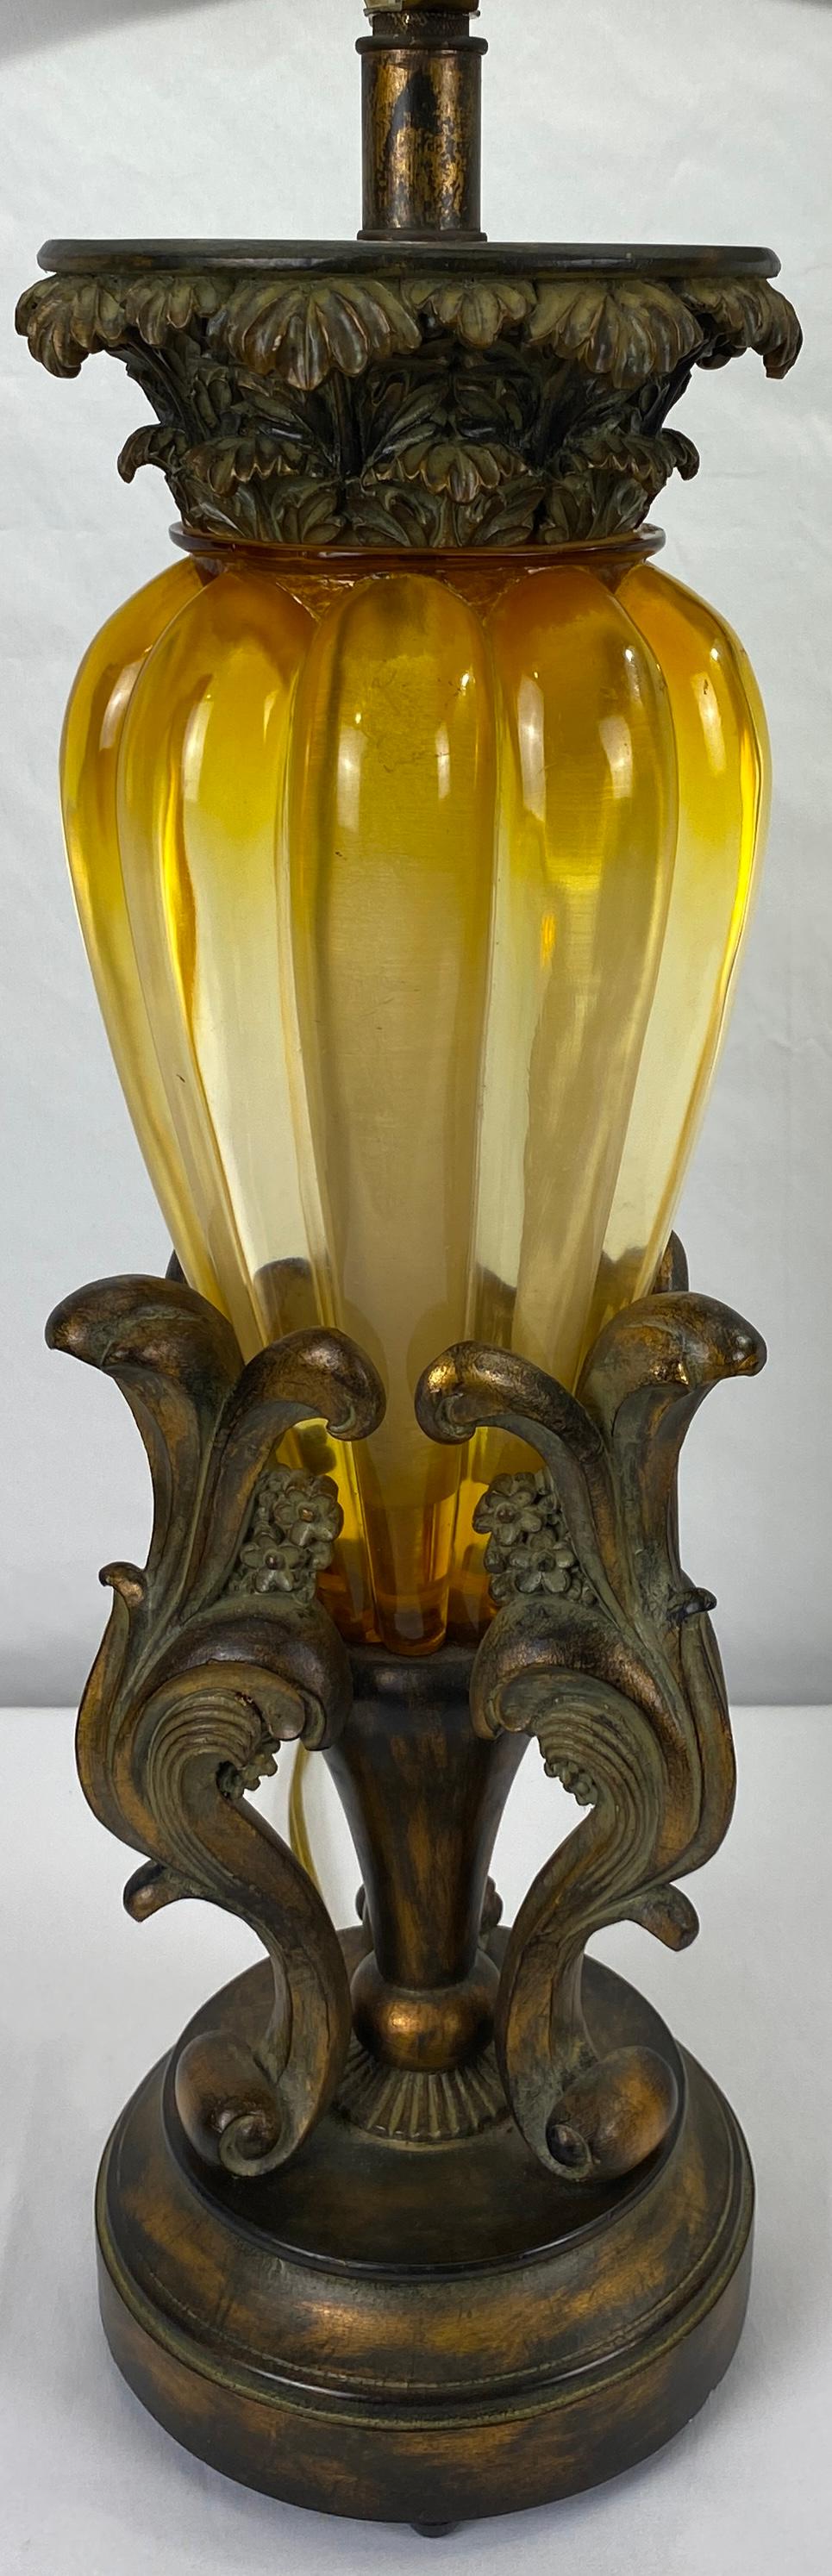 20th Century Pair of Mid-Century Amber Glass Table Lamps with Beige Silk Shades For Sale